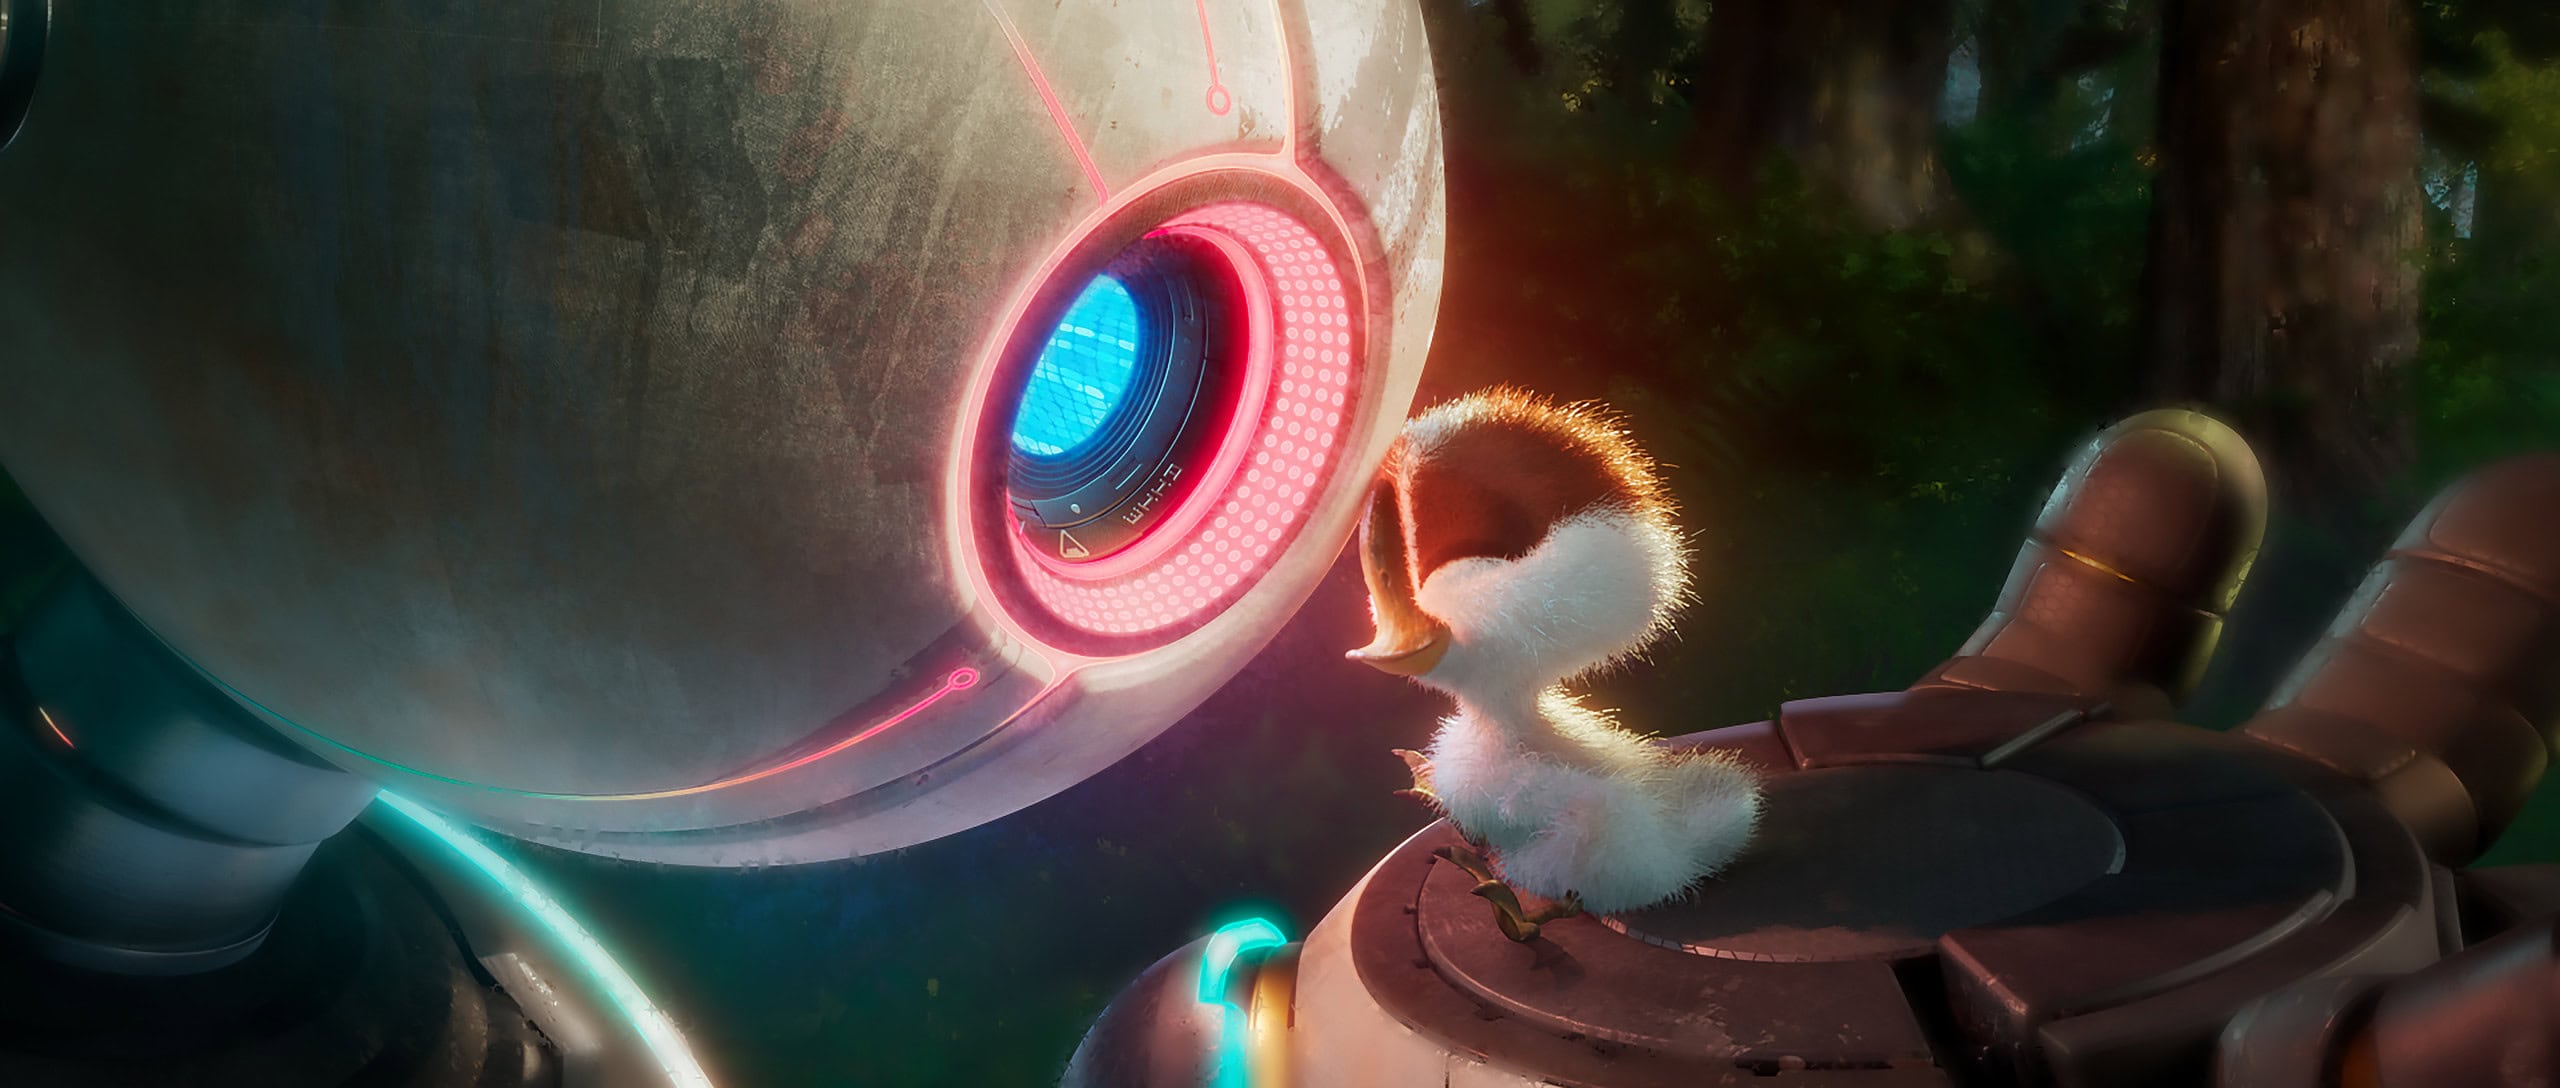 New Trailer for The Wild Robot Showcases an Emotional Journey